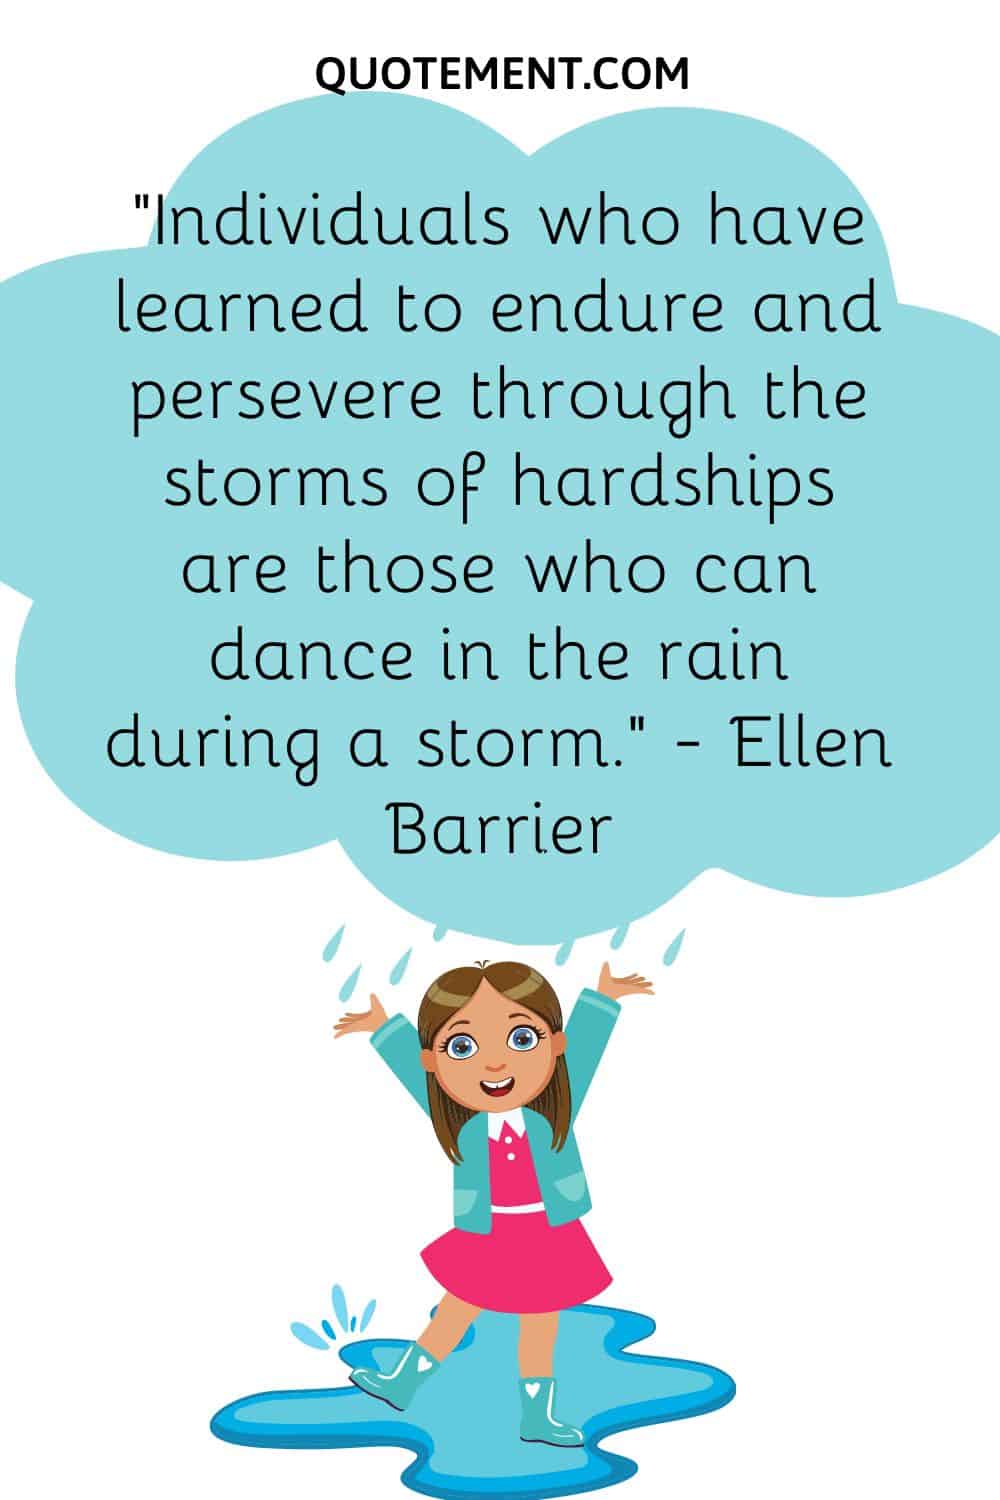 Individuals who have learned to endure and persevere through the storms of hardships are those who can dance in the rain during a storm